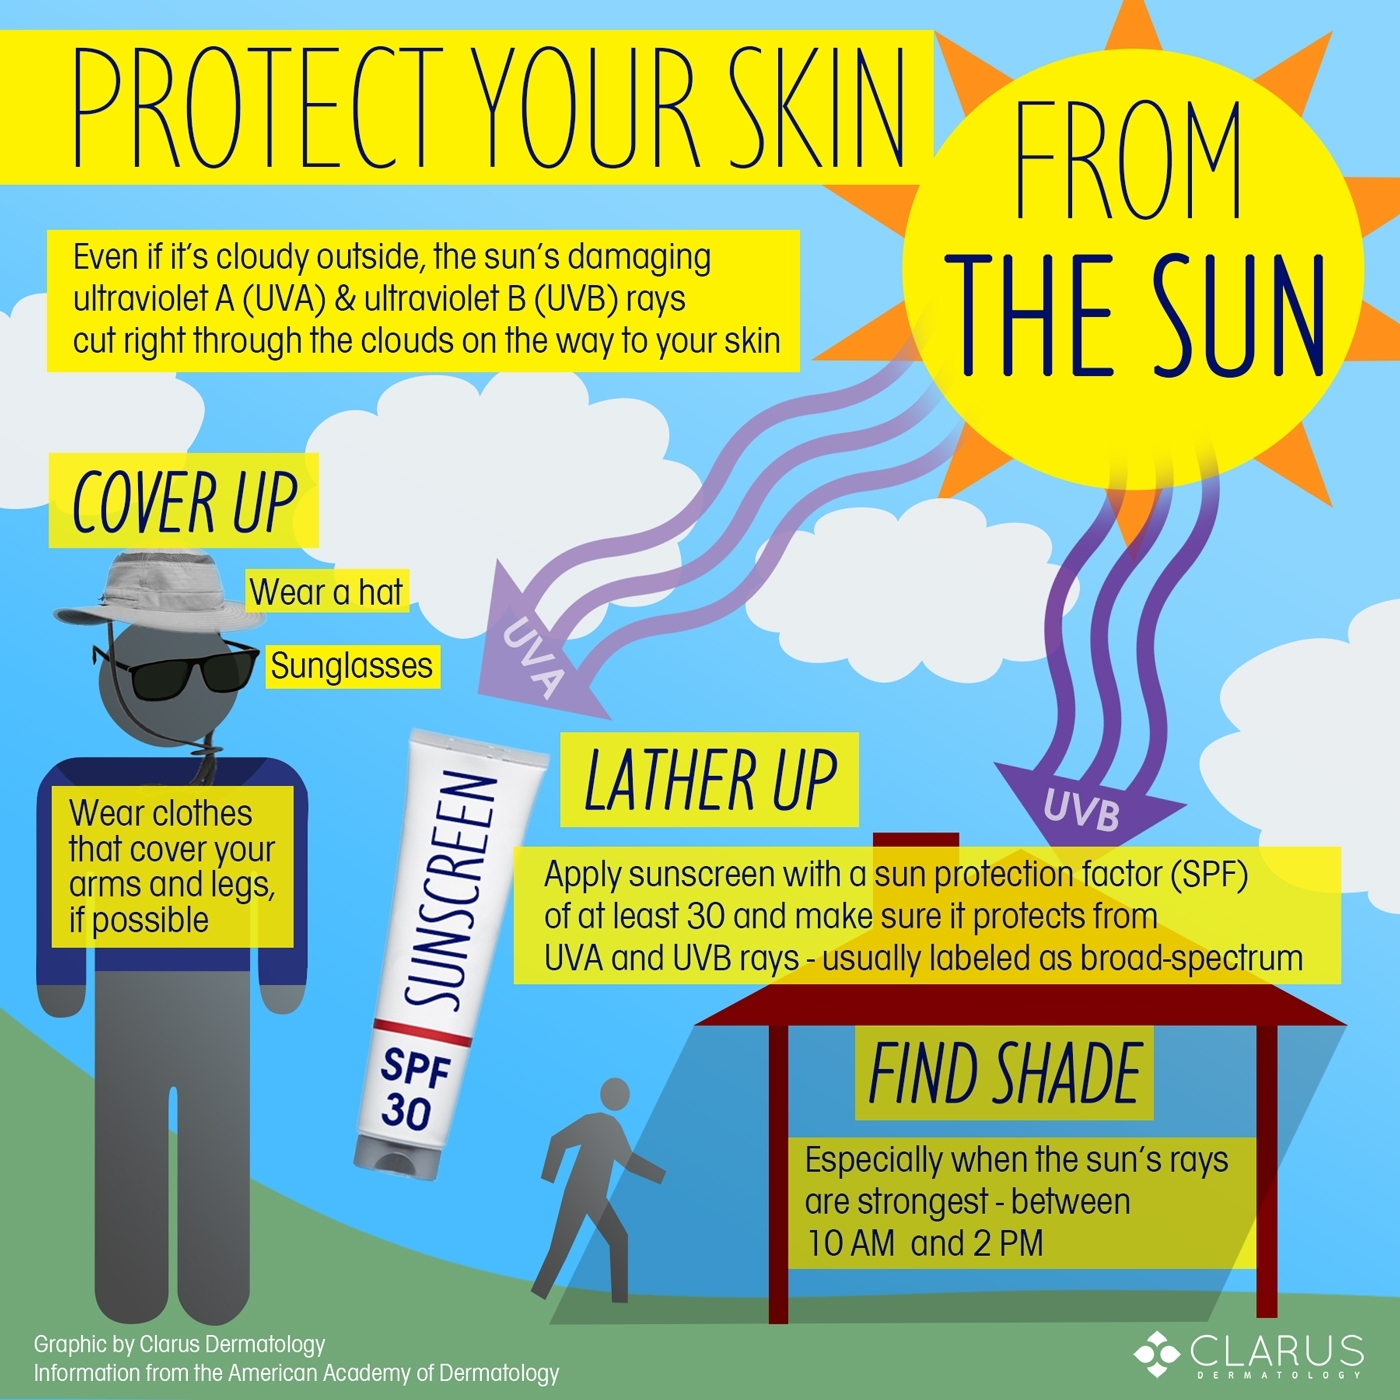 Now that spring is in full swing and we are spending more time outside, Clarus Dermatology wants our patients to be mindful of their exposure to the sun’s damaging ultraviolet A (UVA) and ultraviolet B (UVB) rays. Even if it’s cloudy outside, the sun’s rays are still harmful to your skin, and we want to make sure you take the steps in this guide to stay protected.